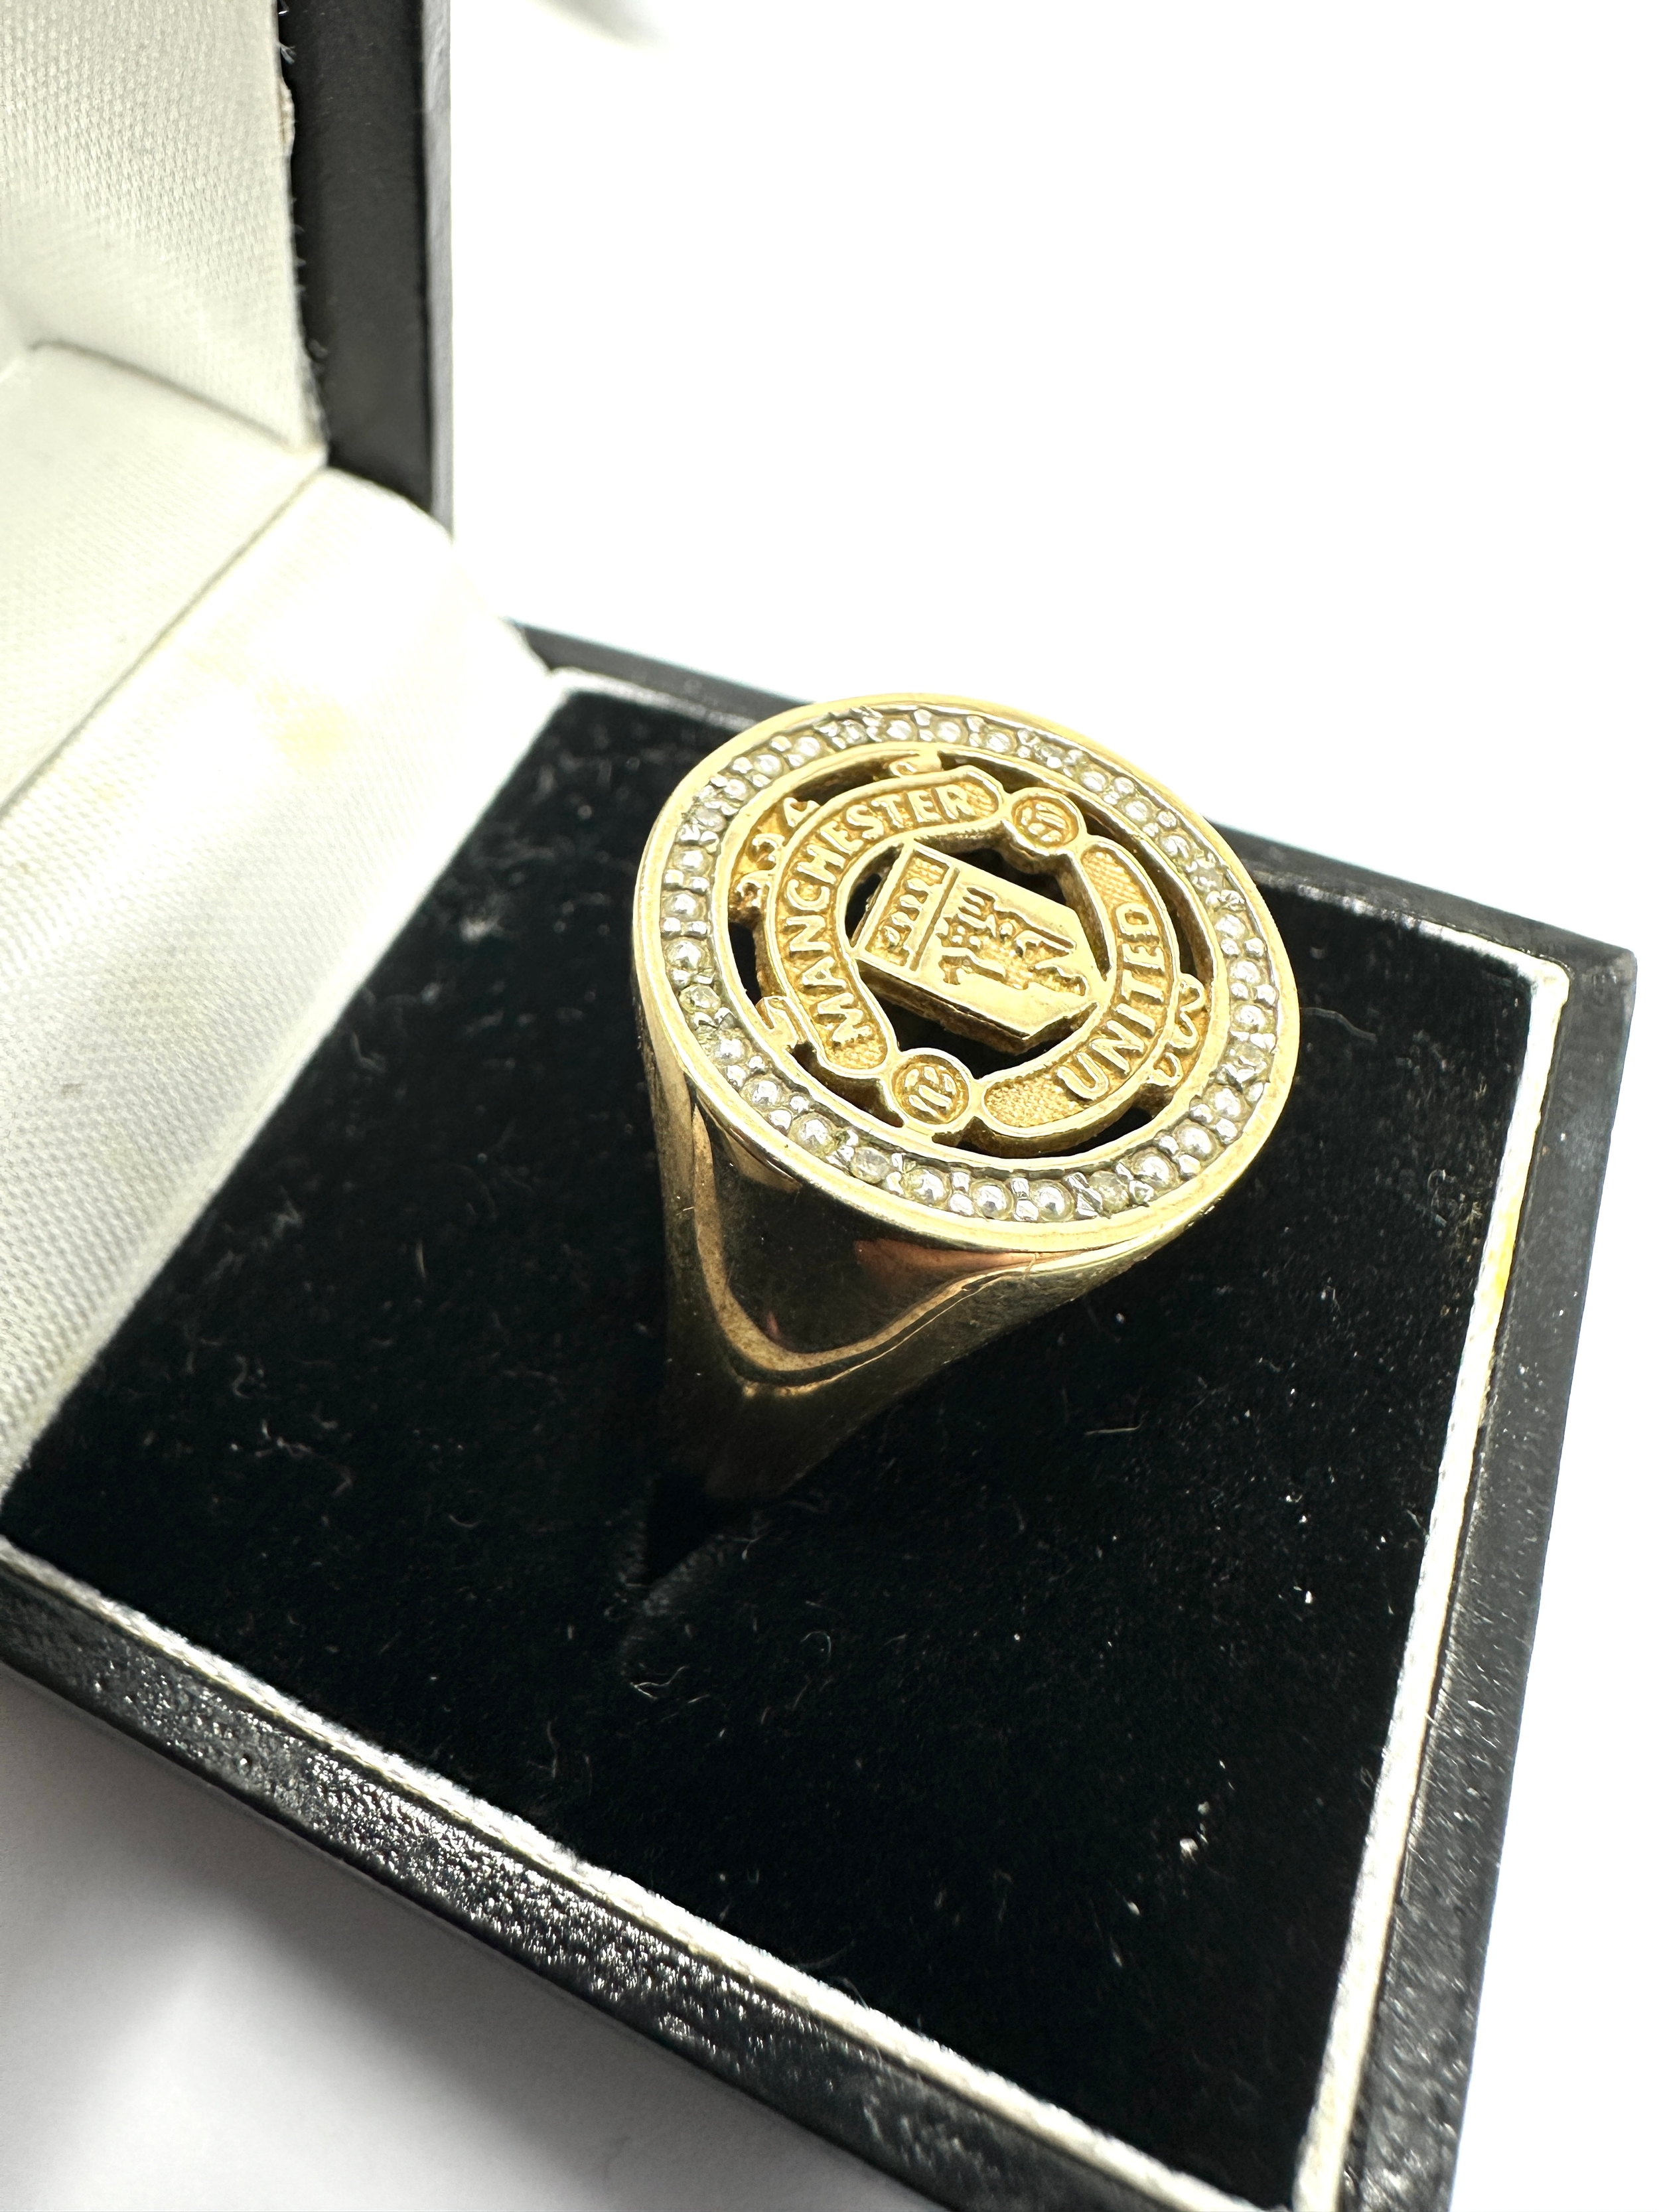 Boxed manchester united 9ct gold & diamond ring weight 5.6g - Image 2 of 5